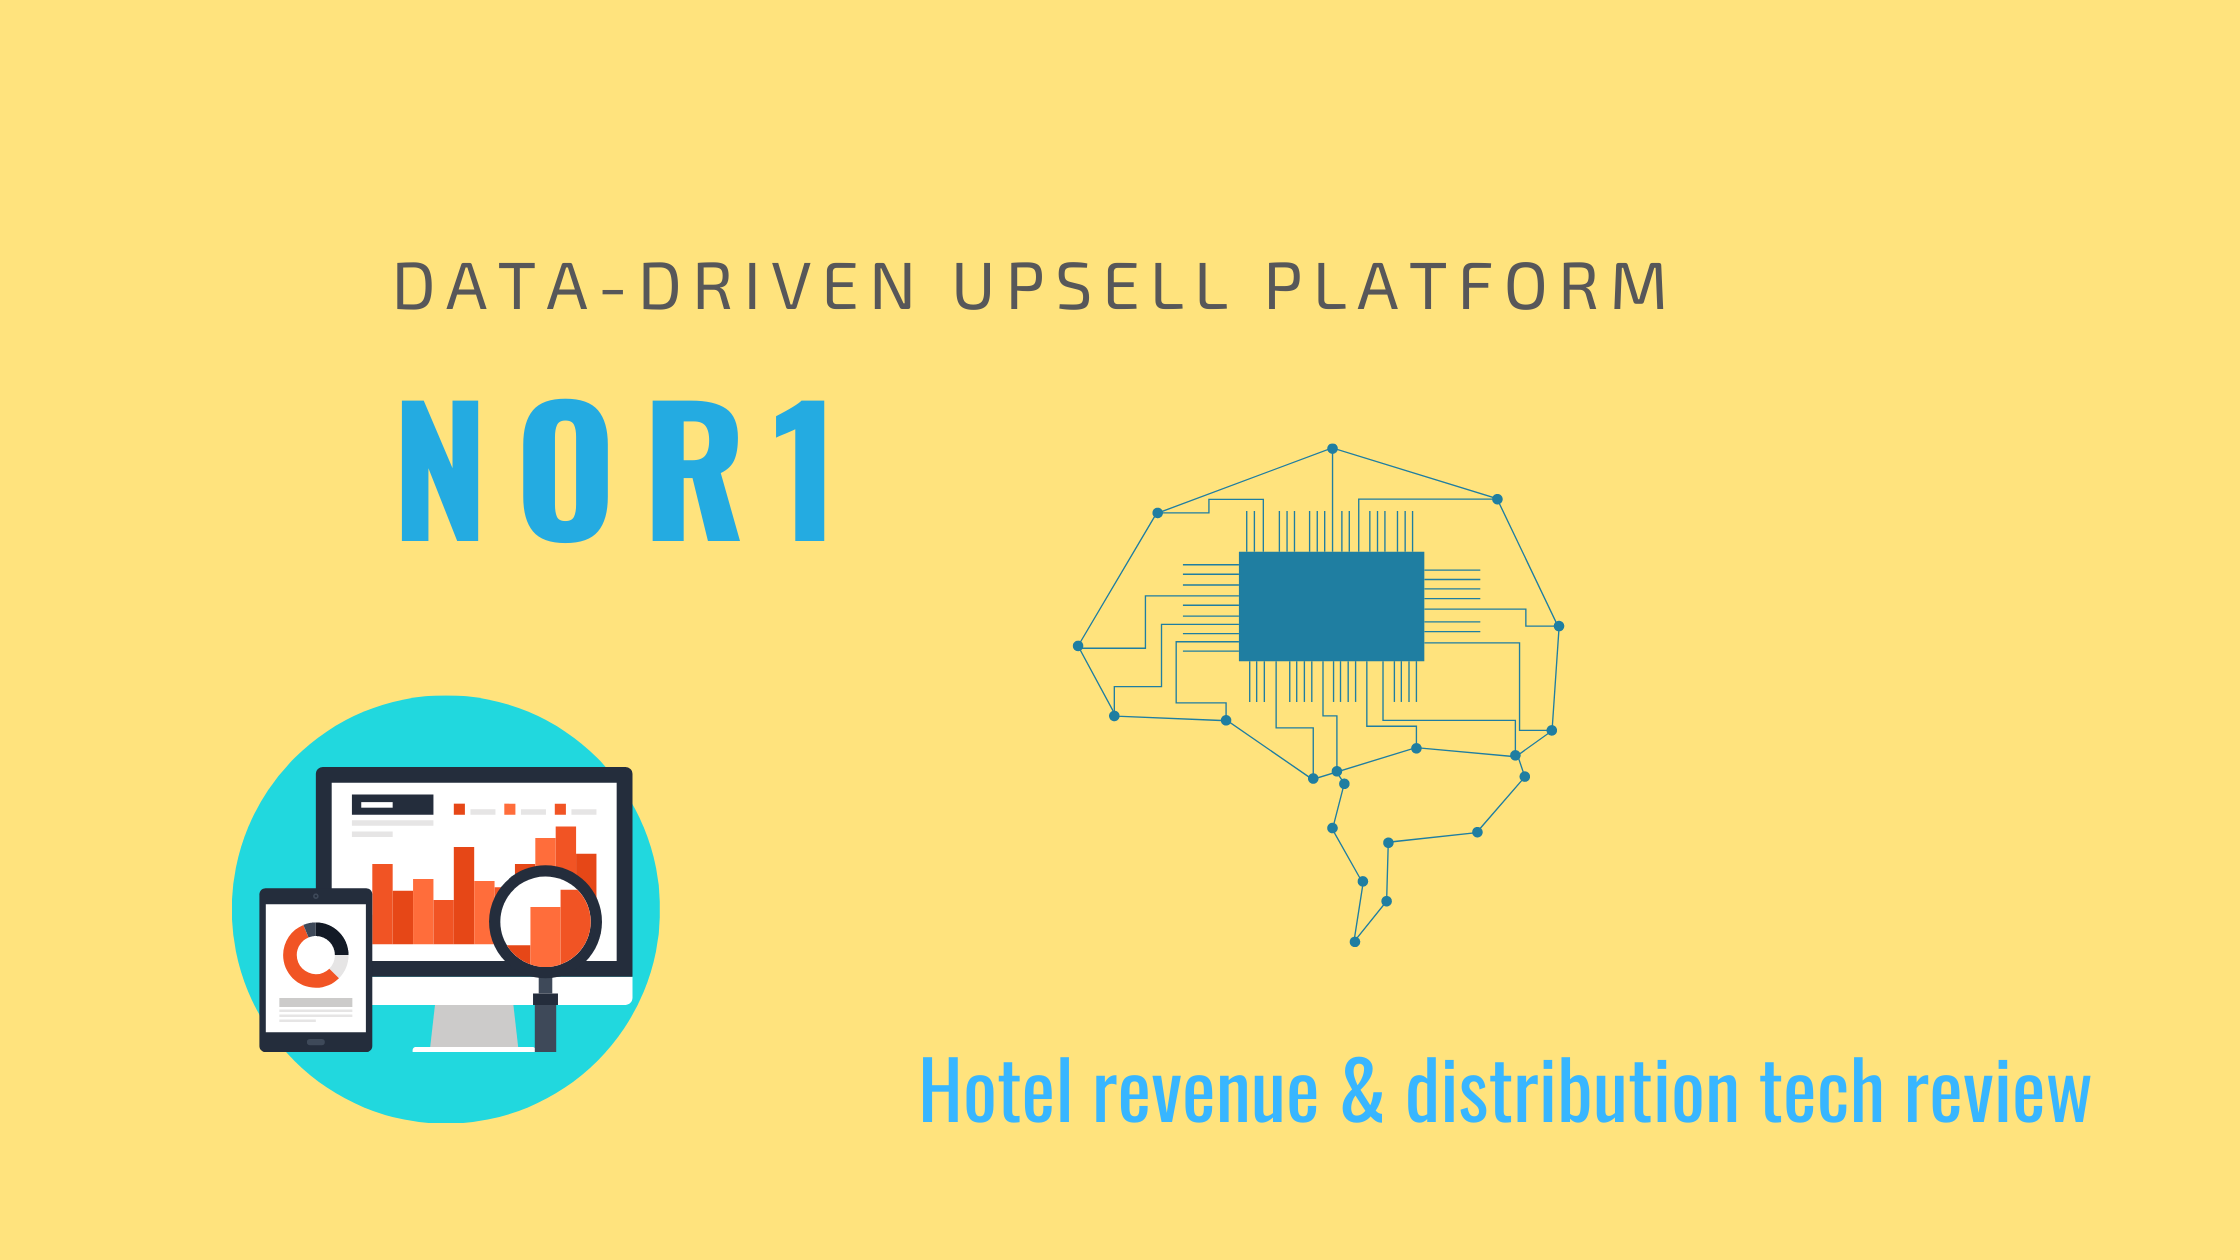 Generate incremental revenue and increase guest satisfaction with a data-driven upsell platform NOR1